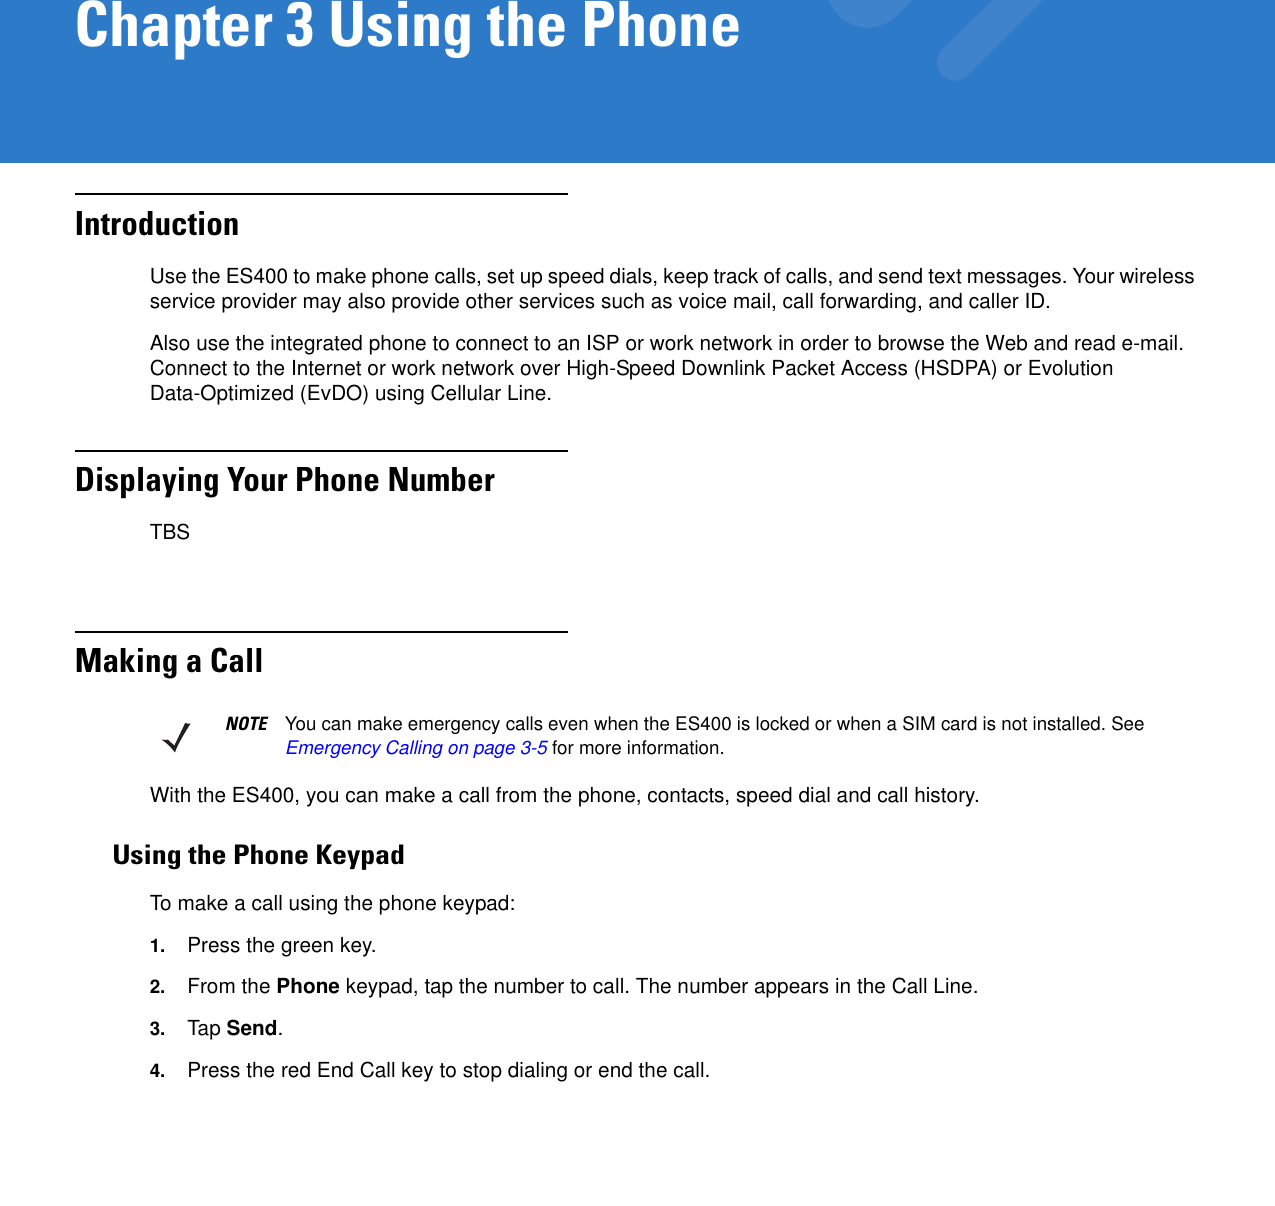 Chapter 3 Using the PhoneIntroductionUse the ES400 to make phone calls, set up speed dials, keep track of calls, and send text messages. Your wireless service provider may also provide other services such as voice mail, call forwarding, and caller ID.Also use the integrated phone to connect to an ISP or work network in order to browse the Web and read e-mail. Connect to the Internet or work network over High-Speed Downlink Packet Access (HSDPA) or Evolution Data-Optimized (EvDO) using Cellular Line. Displaying Your Phone NumberTBSMaking a CallWith the ES400, you can make a call from the phone, contacts, speed dial and call history.Using the Phone KeypadTo make a call using the phone keypad:1. Press the green key.2. From the Phone keypad, tap the number to call. The number appears in the Call Line.3. Tap Send.4. Press the red End Call key to stop dialing or end the call.NOTE You can make emergency calls even when the ES400 is locked or when a SIM card is not installed. See Emergency Calling on page 3-5 for more information.